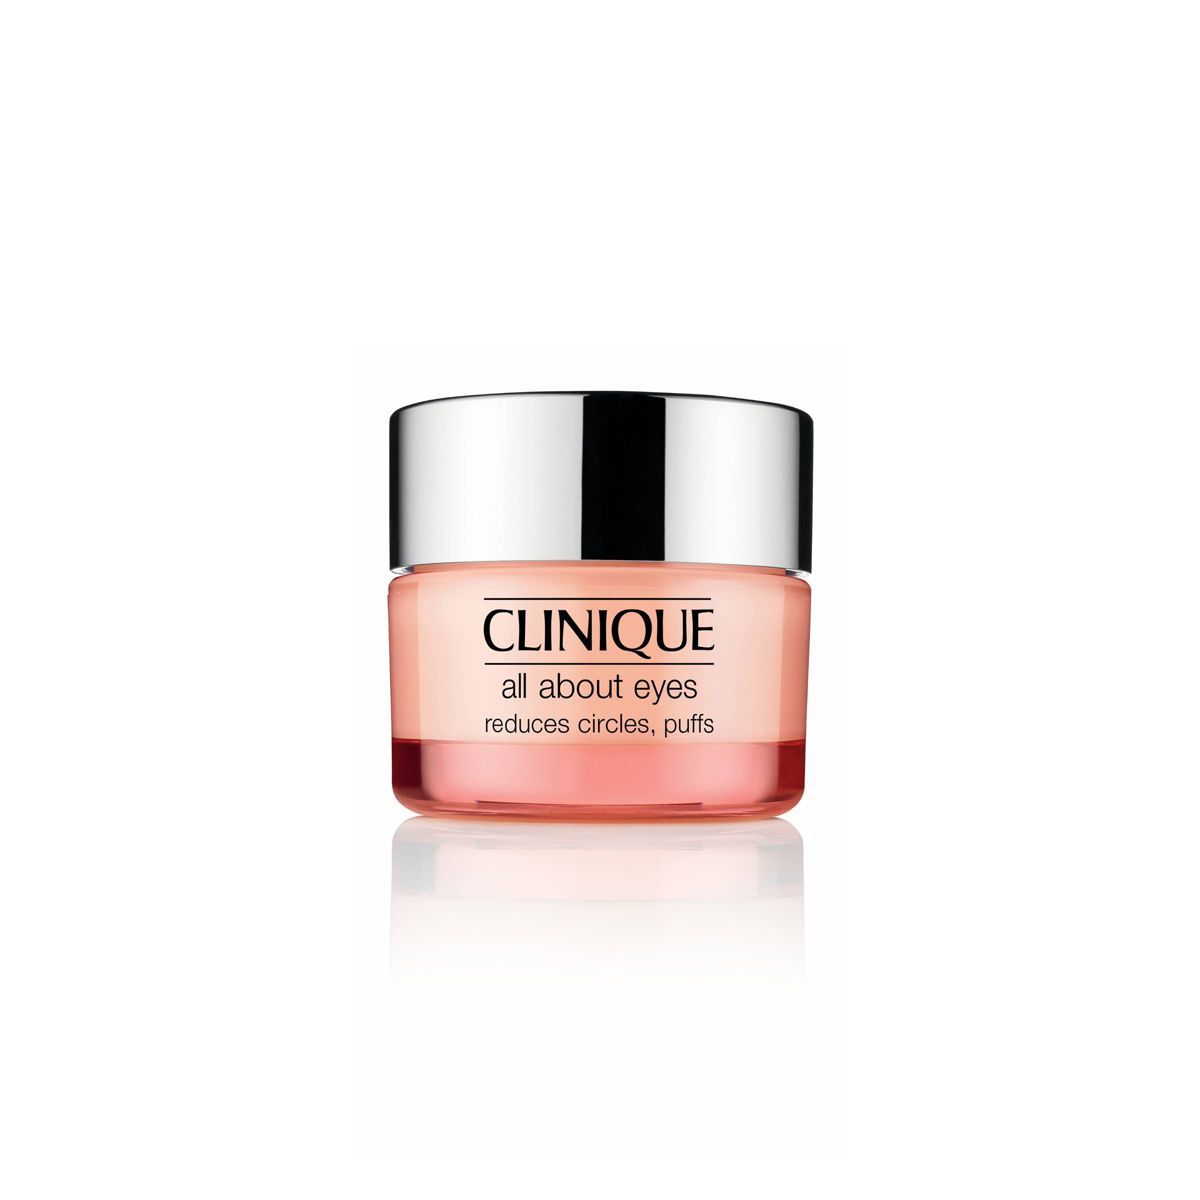 Clinique All About Eyes Eye Cream with Vitamin C - 0.5oz - Ulta Beauty | Target